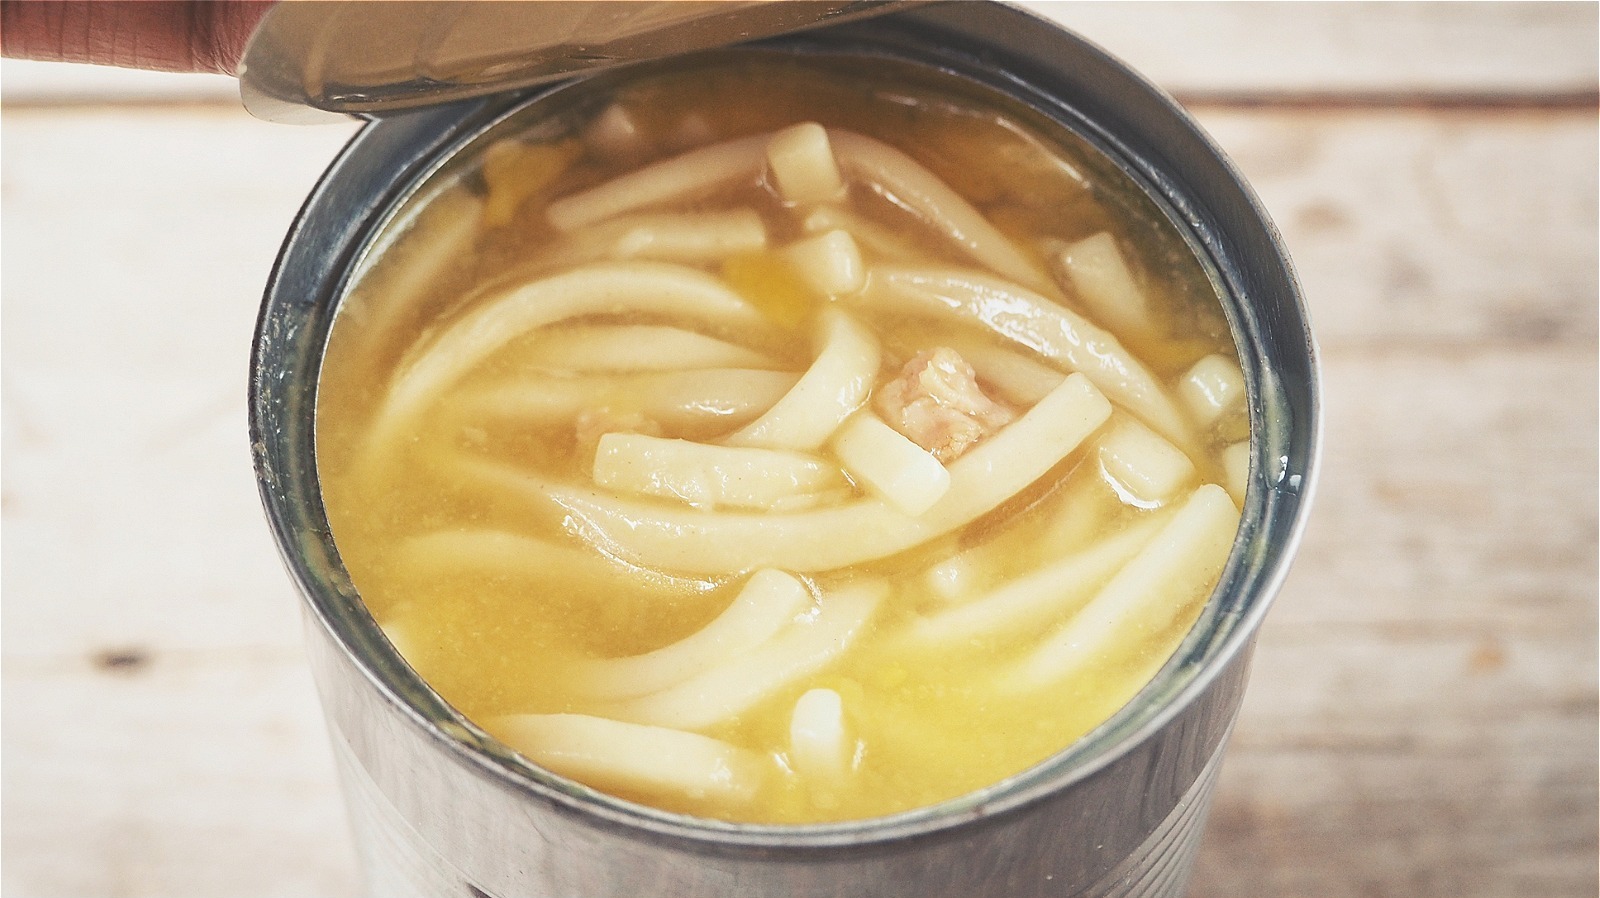 The Reason Soggy Noodles Are Not A Problem With Canned Soup - Mashed ...